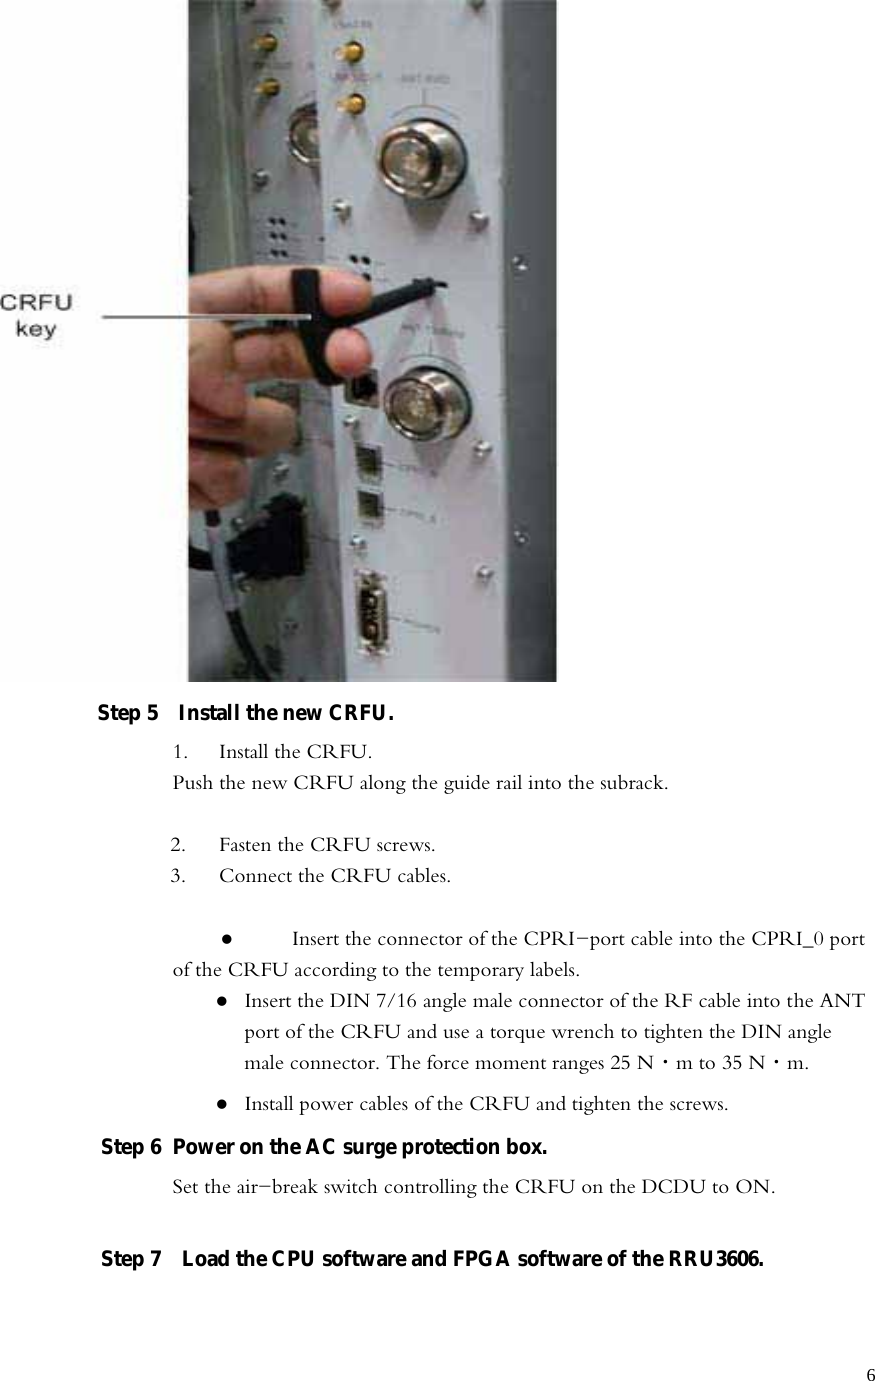   6 Step 5    Install the new CRFU.   1.  Install the CRFU. Push the new CRFU along the guide rail into the subrack.  2.  Fasten the CRFU screws.   3.  Connect the CRFU cables.      Insert the connector of the CPRI-port cable into the CPRI_0 port of the CRFU according to the temporary labels.    Insert the DIN 7/16 angle male connector of the RF cable into the ANT port of the CRFU and use a torque wrench to tighten the DIN angle male connector. The force moment ranges 25 N·m to 35 N·m.    Install power cables of the CRFU and tighten the screws.   Step 6  Power on the AC surge protection box. Set the air-break switch controlling the CRFU on the DCDU to ON.  Step 7    Load the CPU software and FPGA software of the RRU3606.   